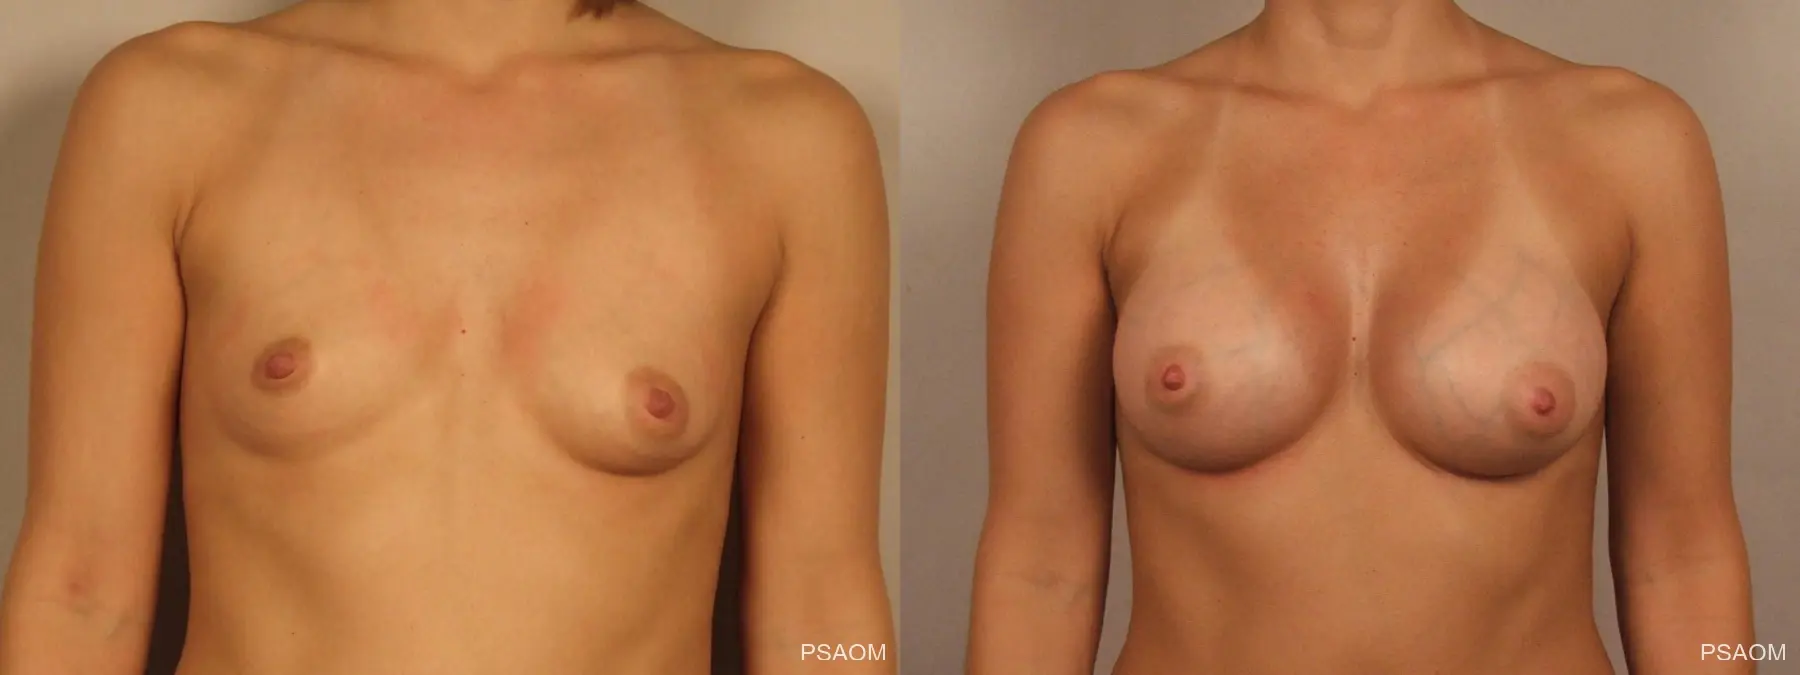 Breast Augmentation: Patient 4 - Before and After 1